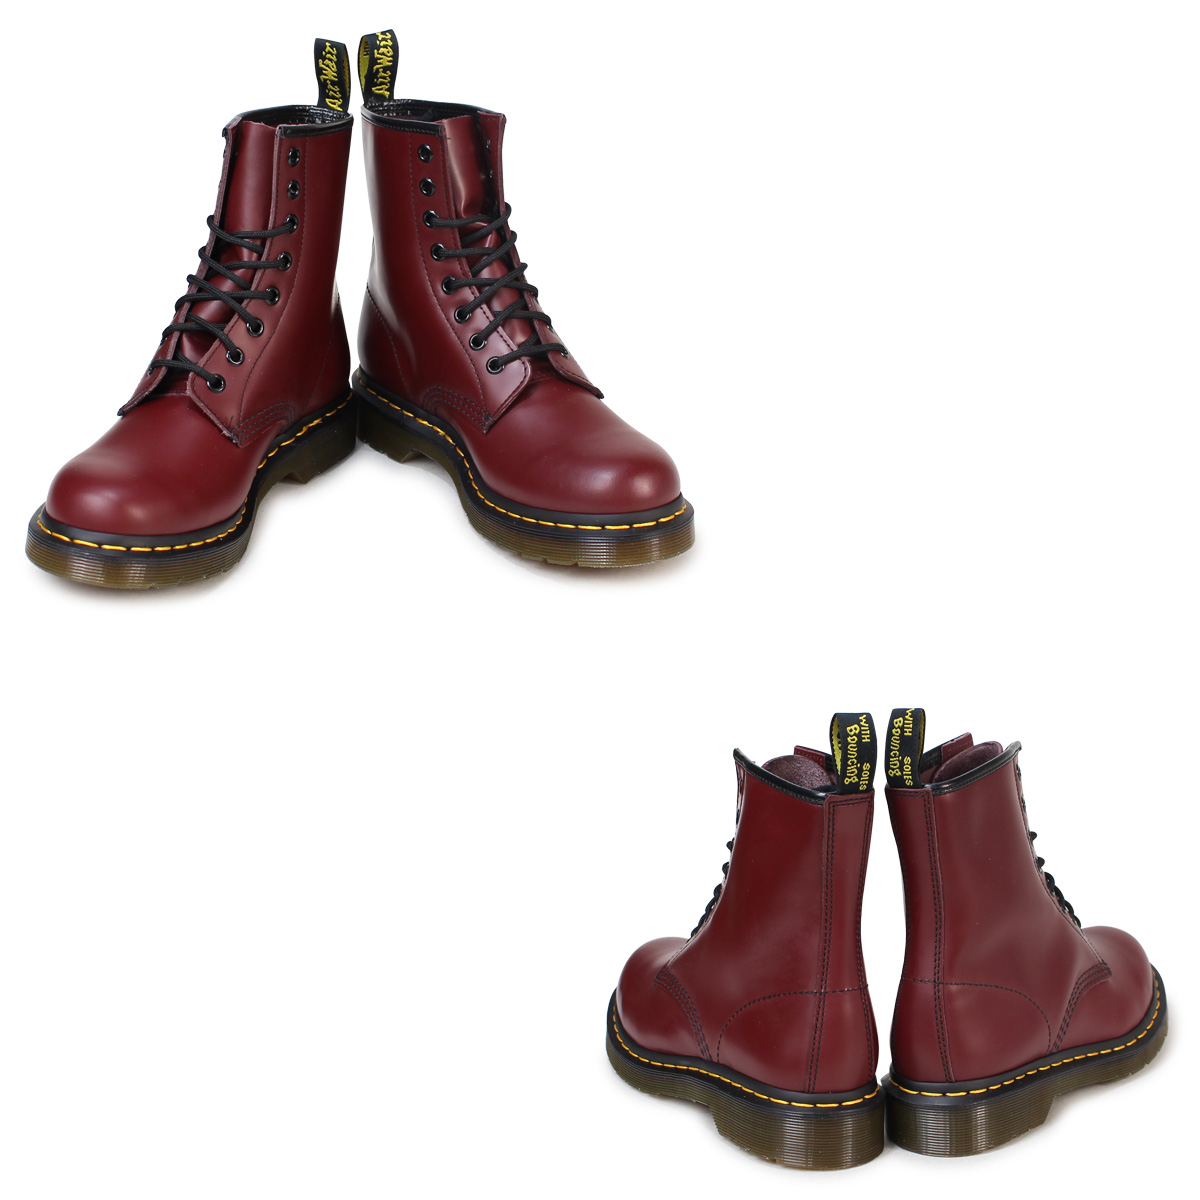 SNEAK ONLINE SHOP: Doctor Martin Dr.Martens 8 hall 1460 Lady's boots